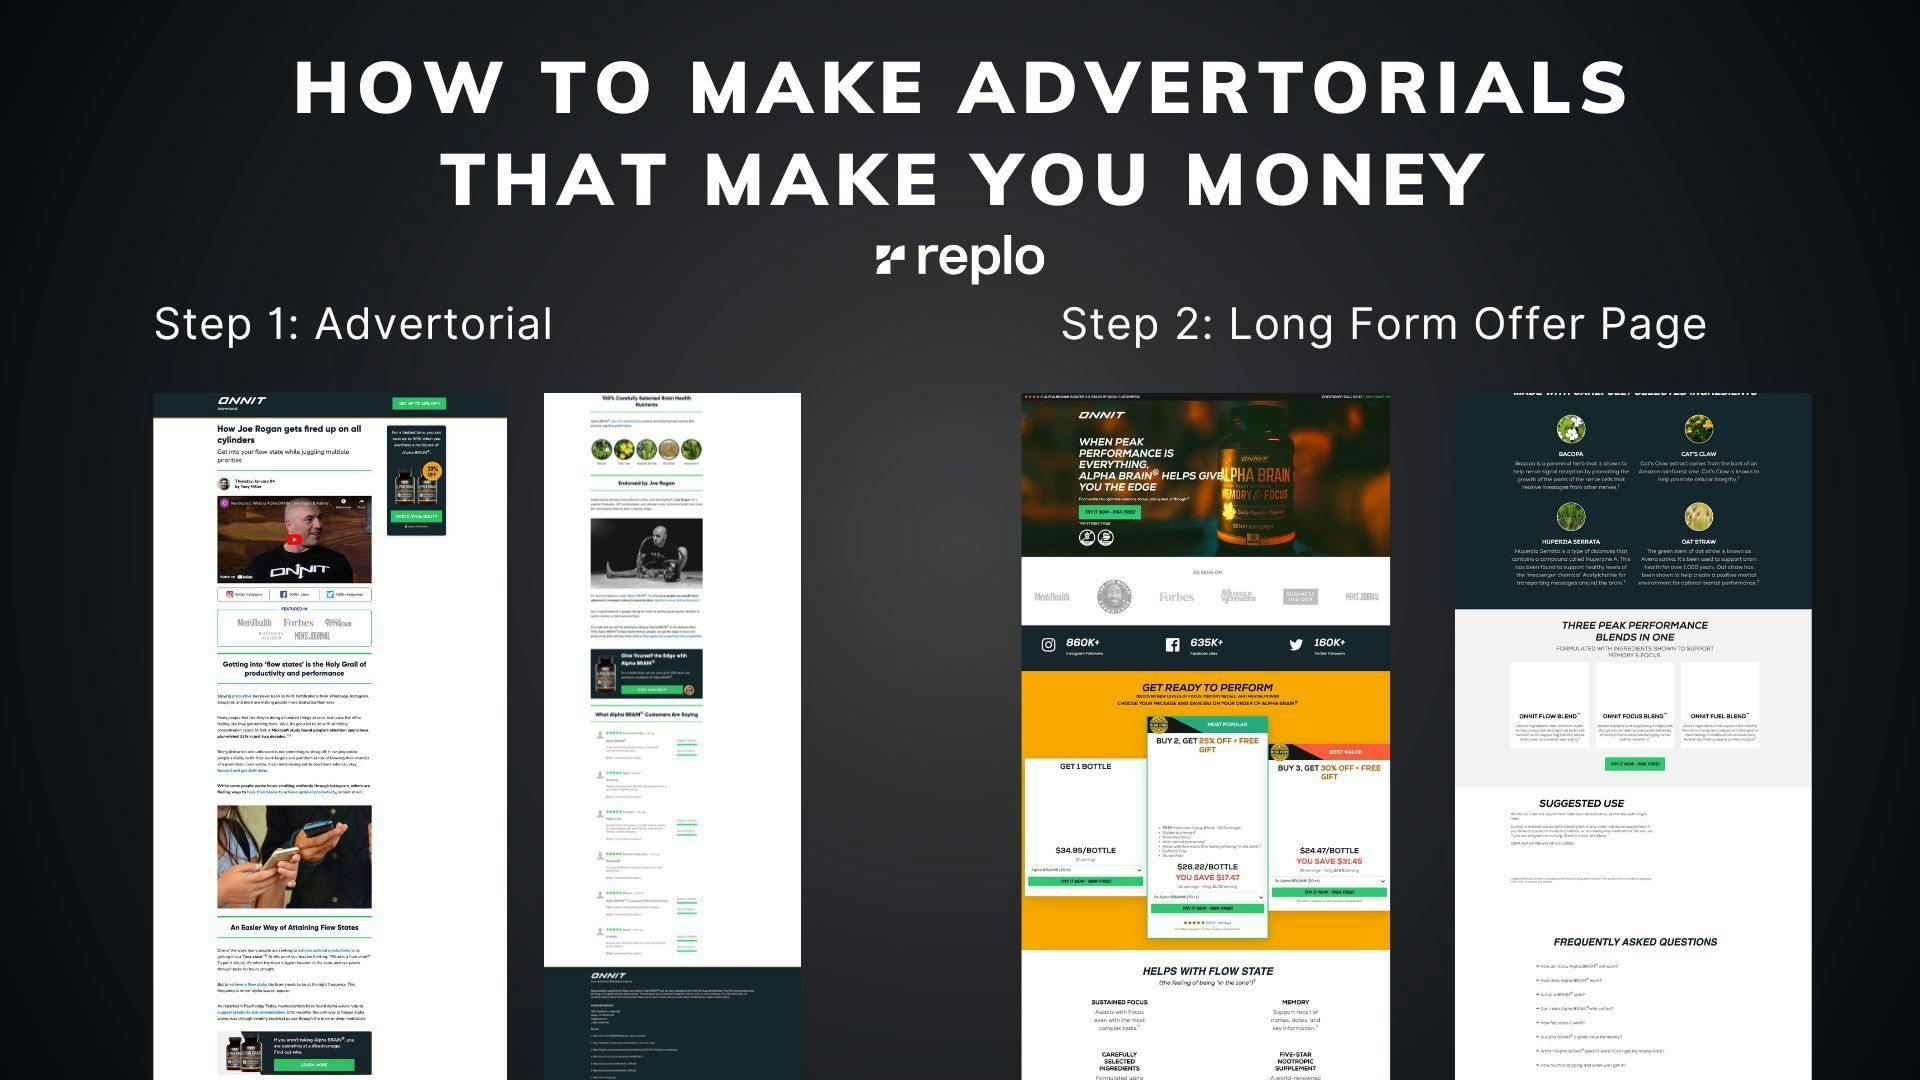 How To Make Advertorials That Make You Money: Templates, Examples, and Best Practices